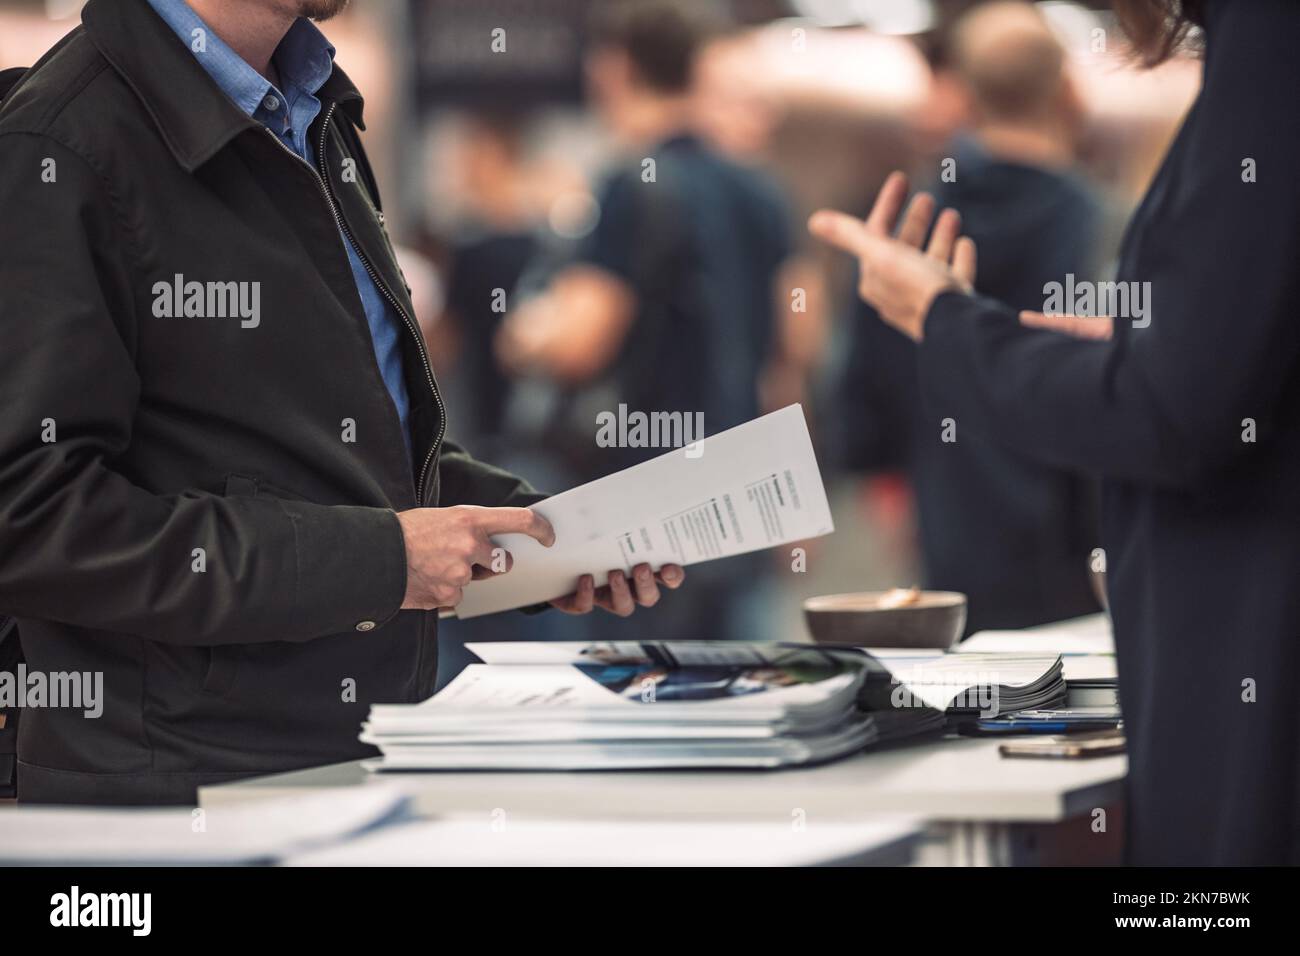 Business people exchanging business promotional materials and brochure on business meeting on trade-show. Business discussion talking deal concept Stock Photo